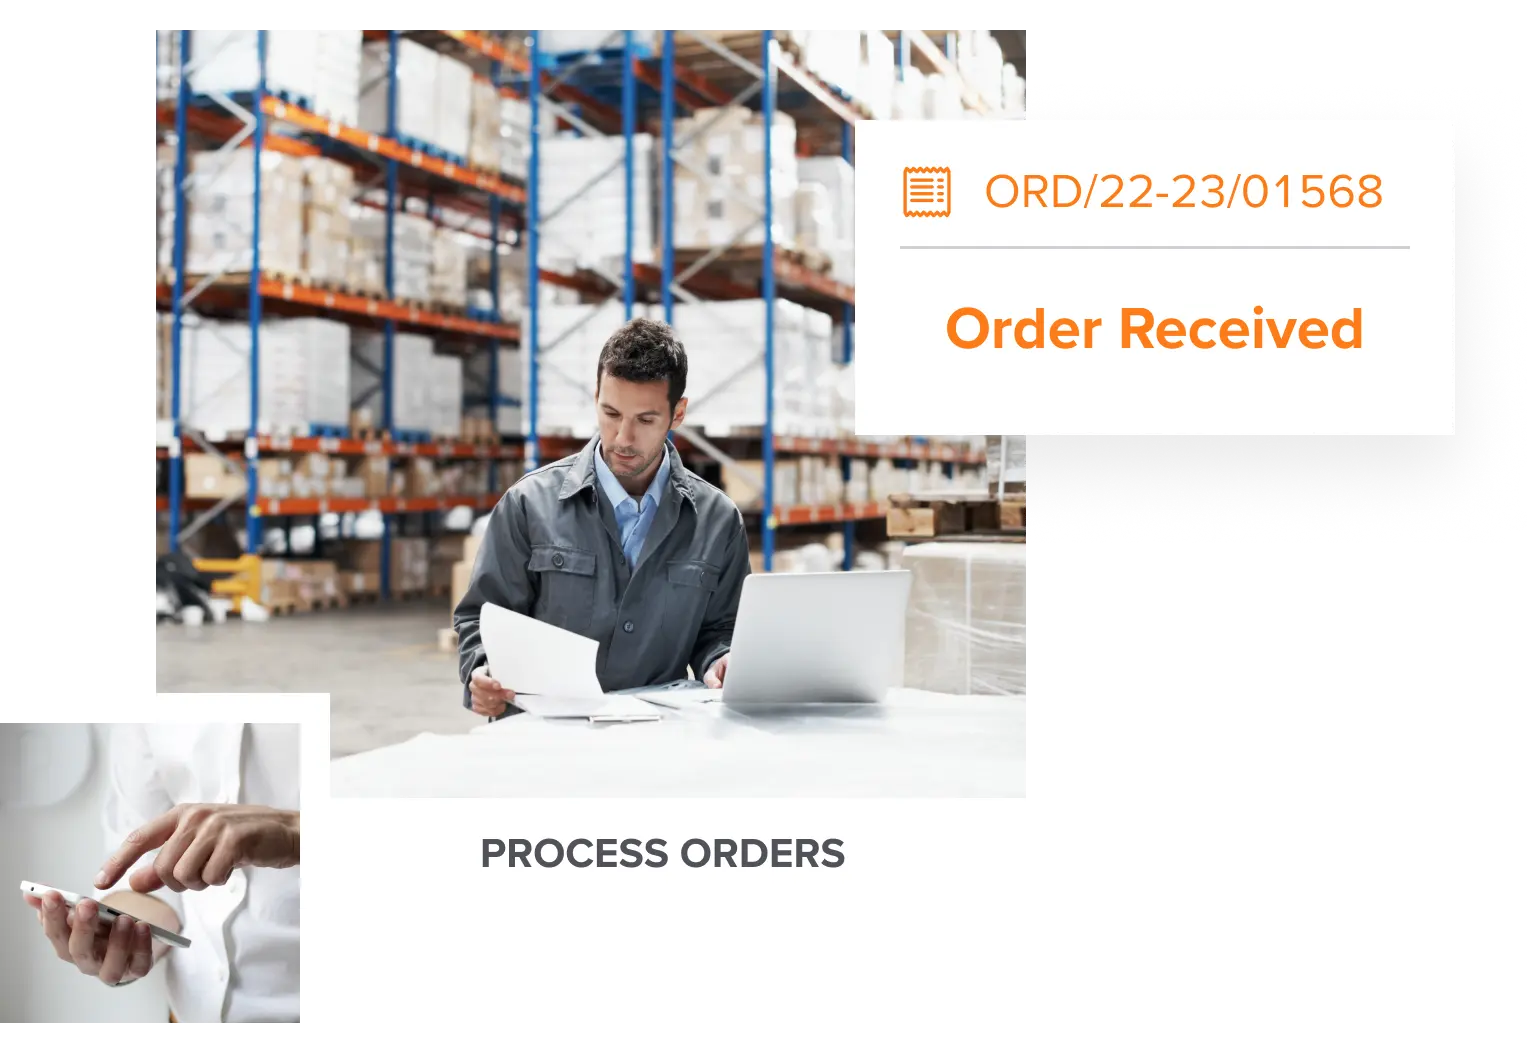 distributo-same-day-delivery-fast-order-fulfilment